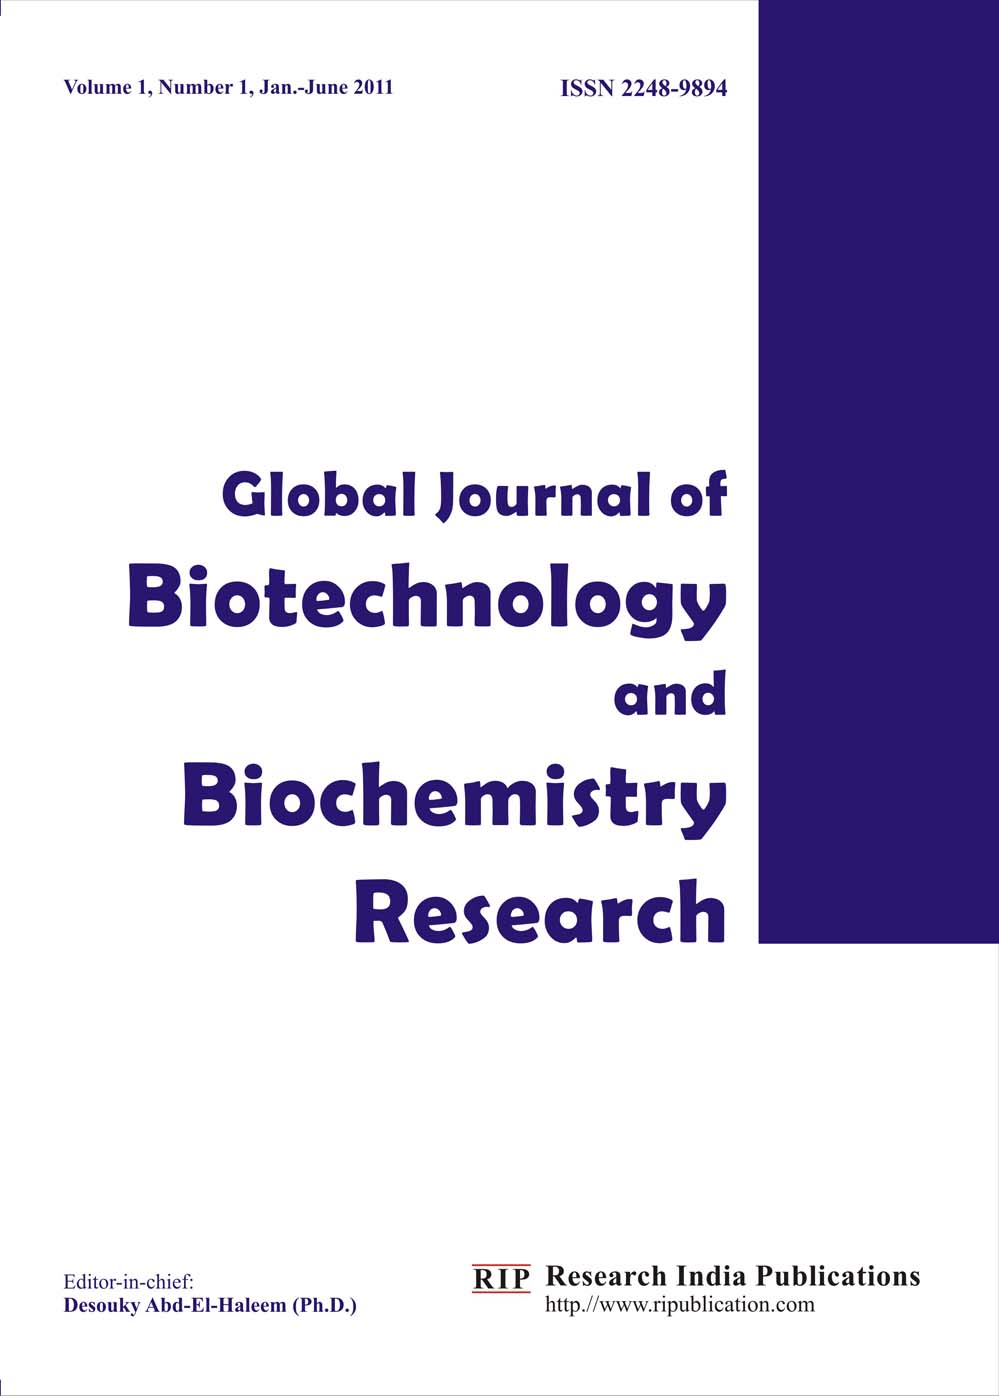 Global Journal of Biotechnology and Biochemistry Research